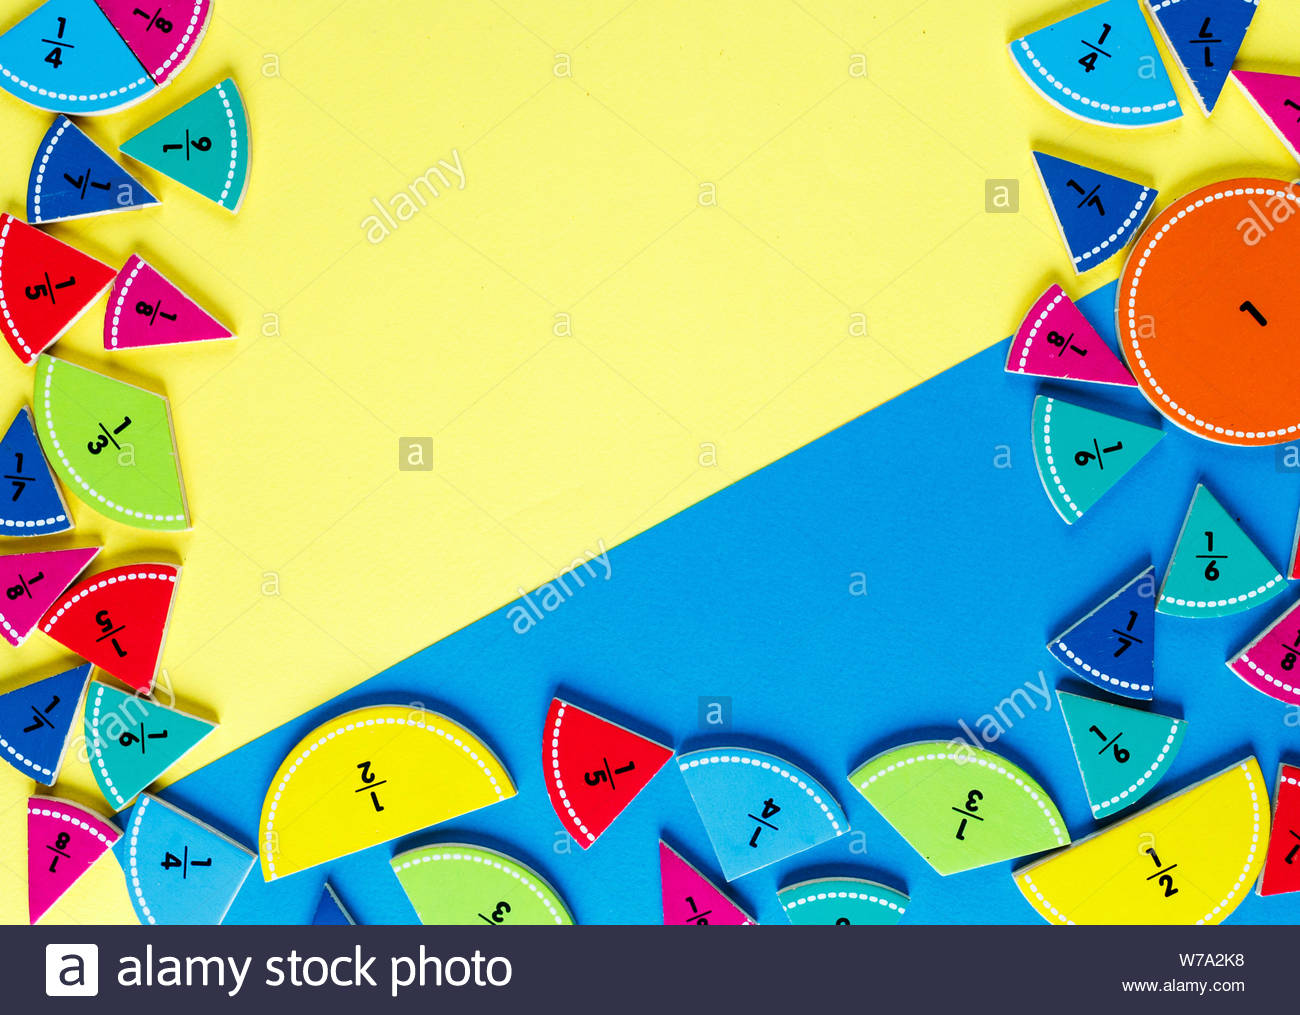 Colorful Math Fractions On The Yellow And Blue Bright Background